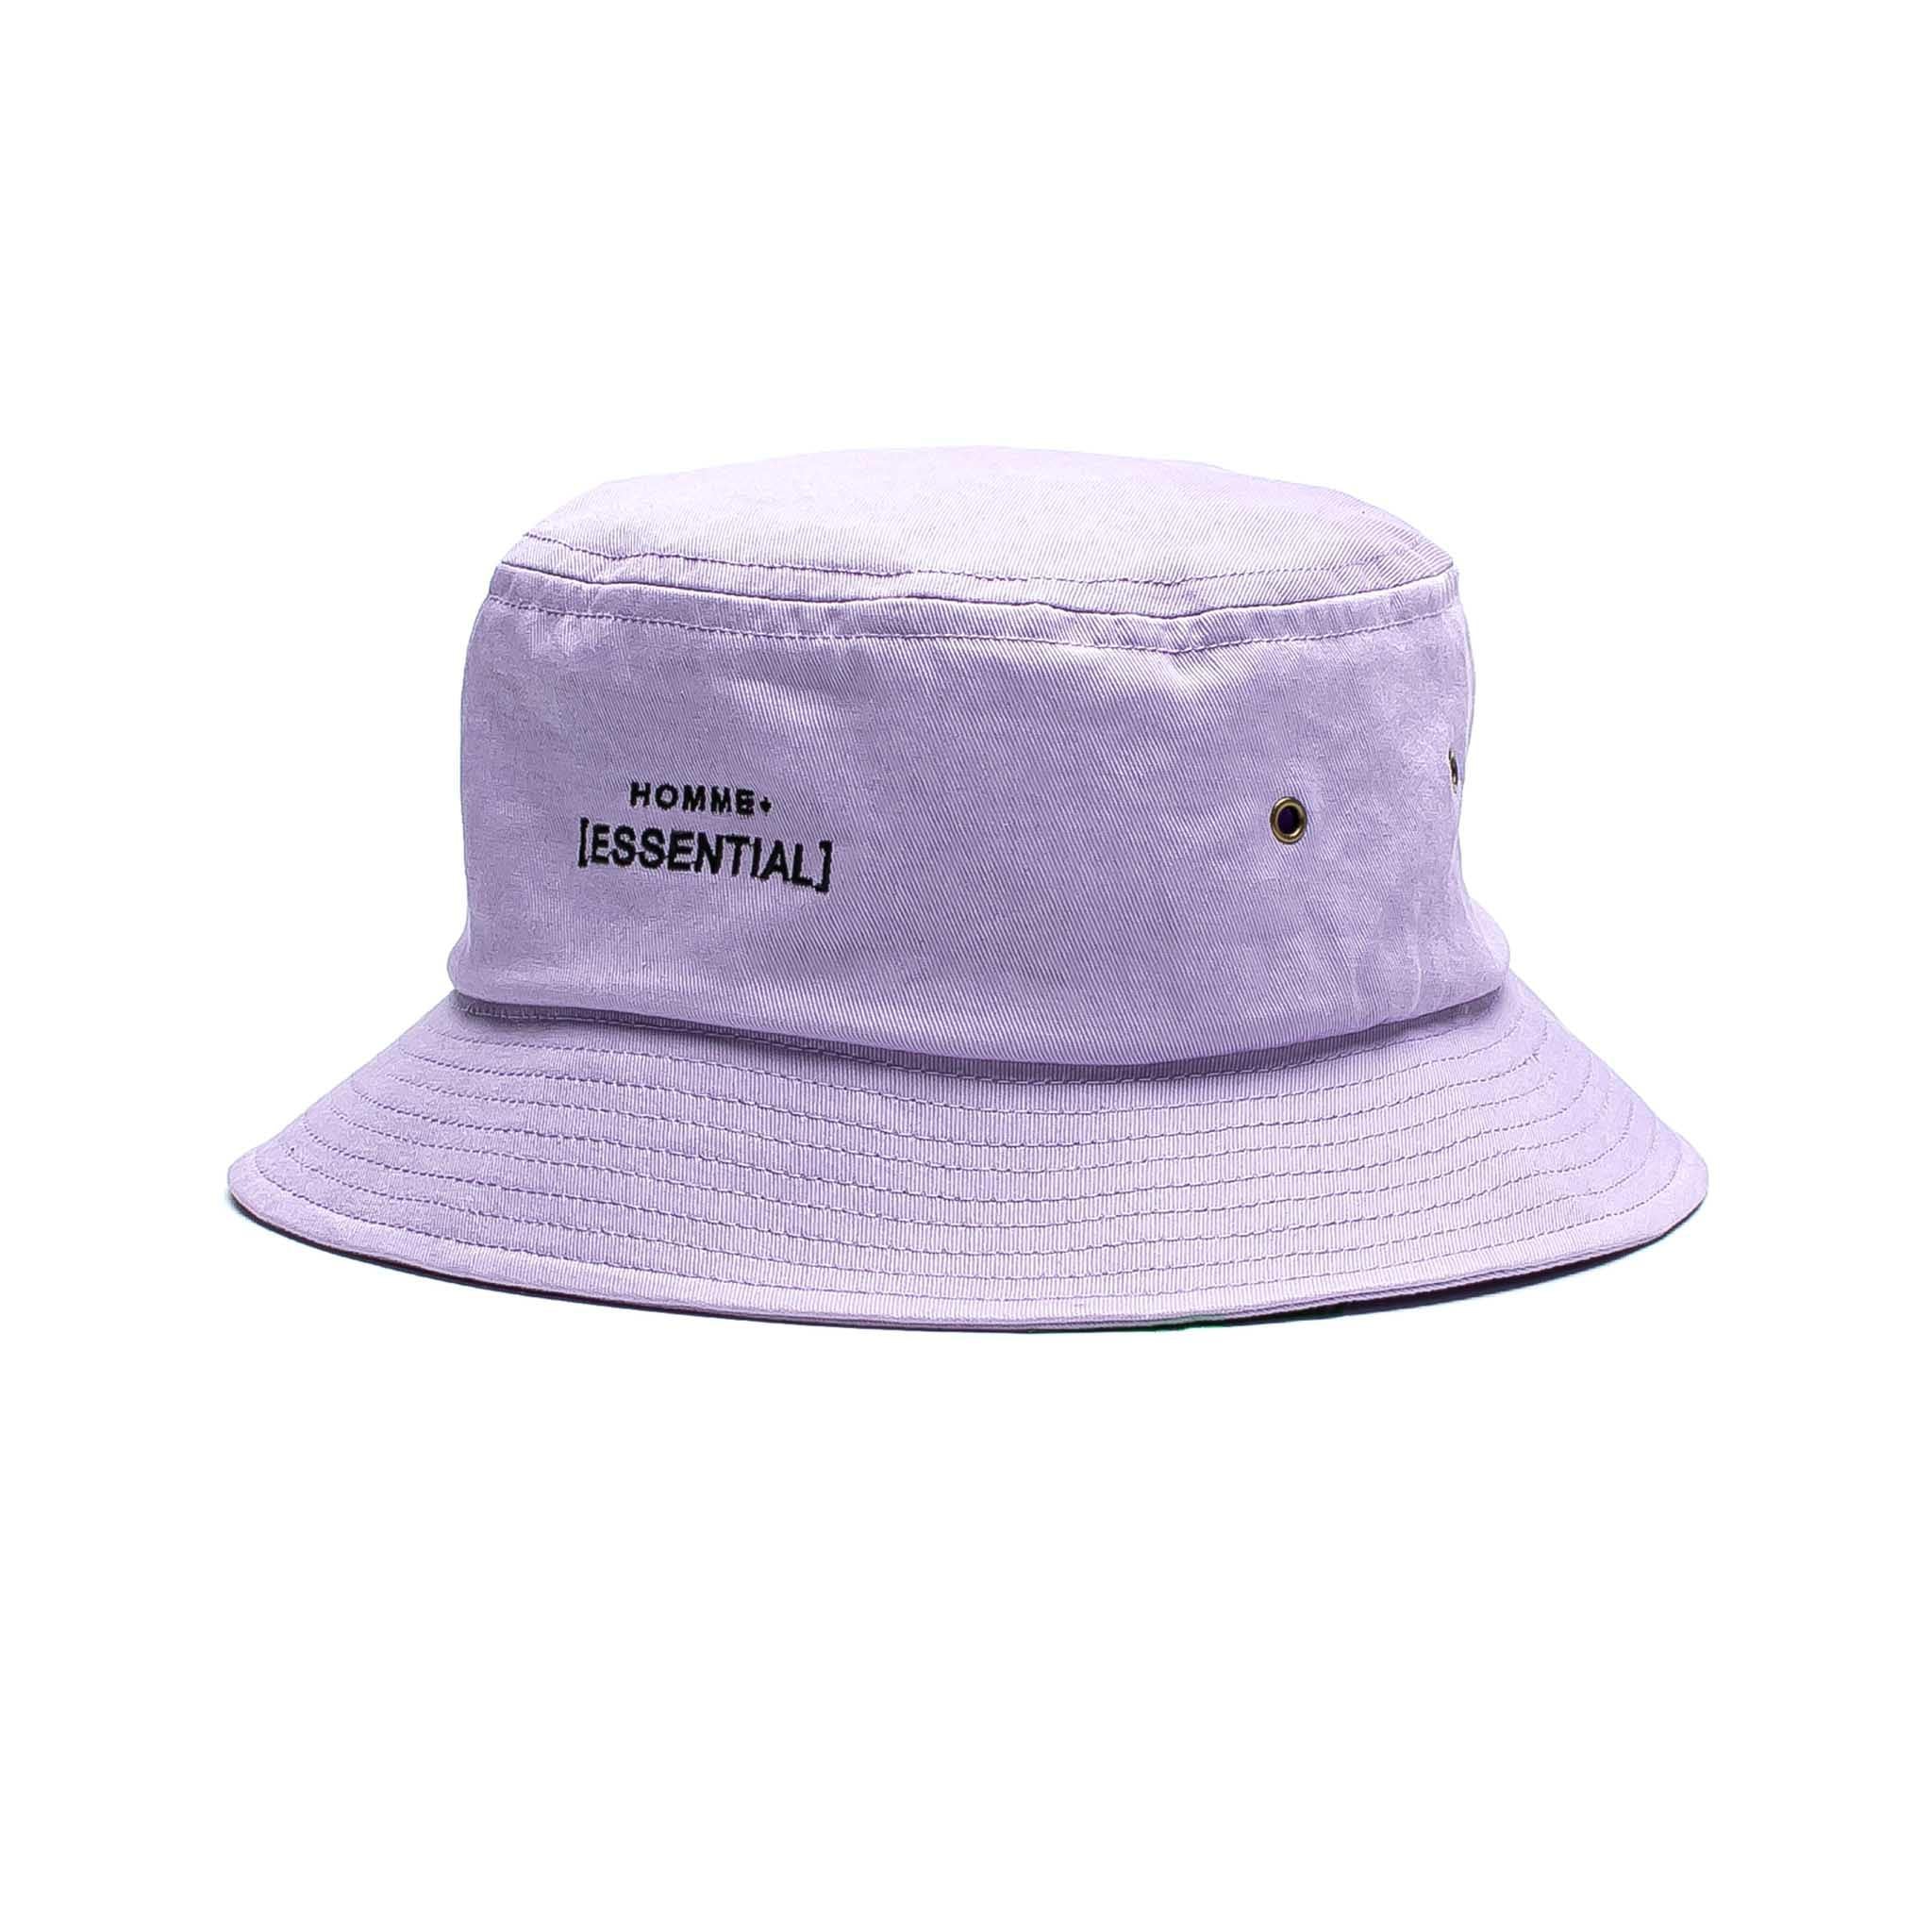 HOMME+ ESSENTIAL Bucket Hat Lilac